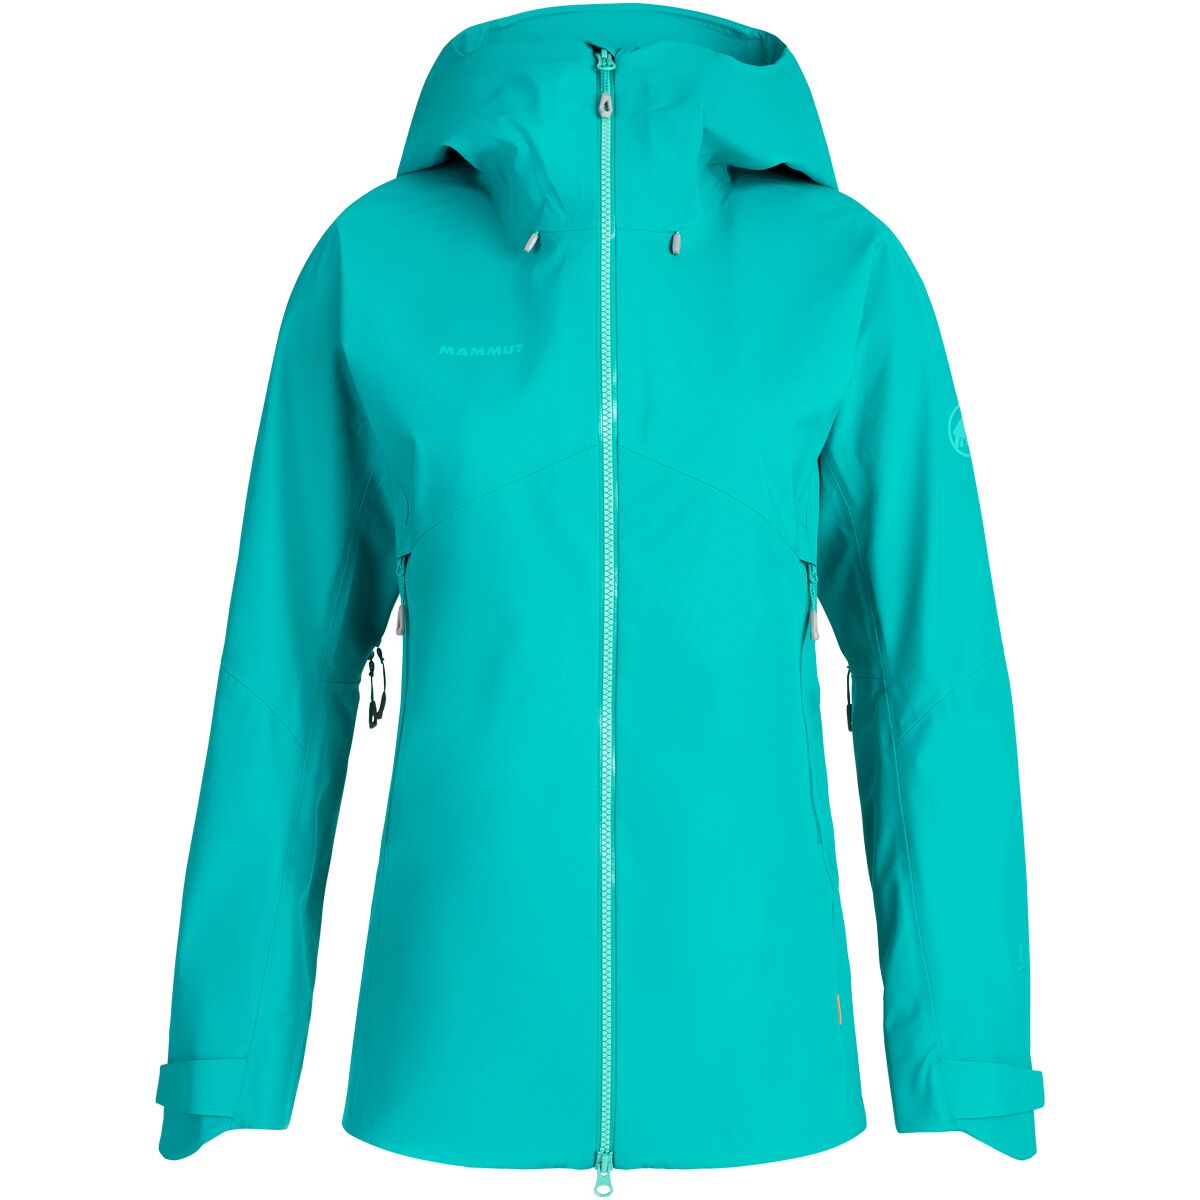 Crater HS Hooded Jacket - Women